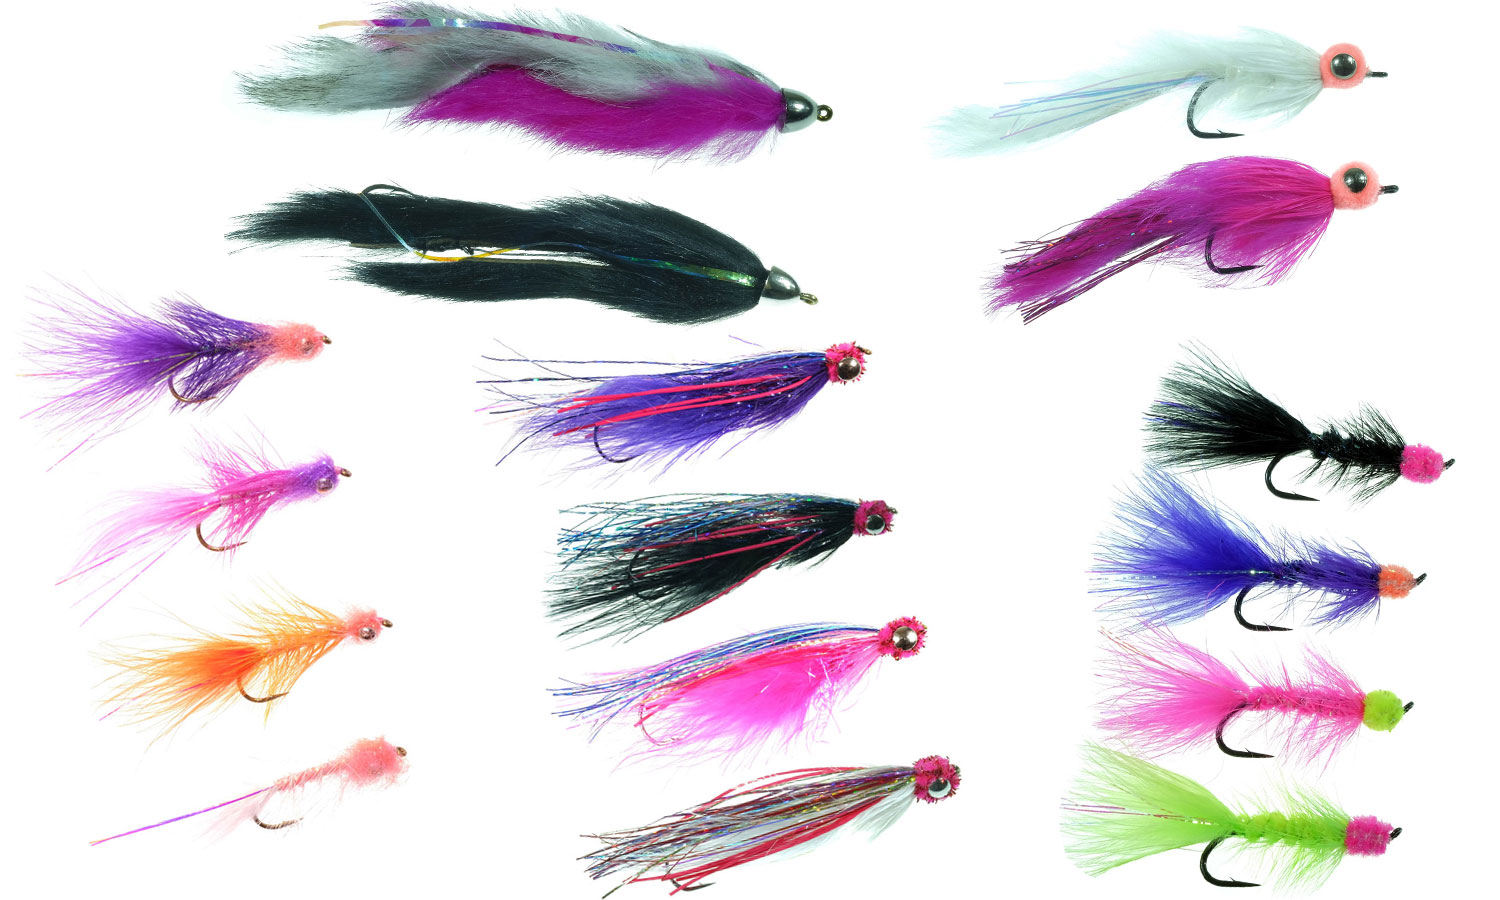 5 NEW Silver Flies for Fall - Gear & Tackle - Alaska Fly Fishing Goods